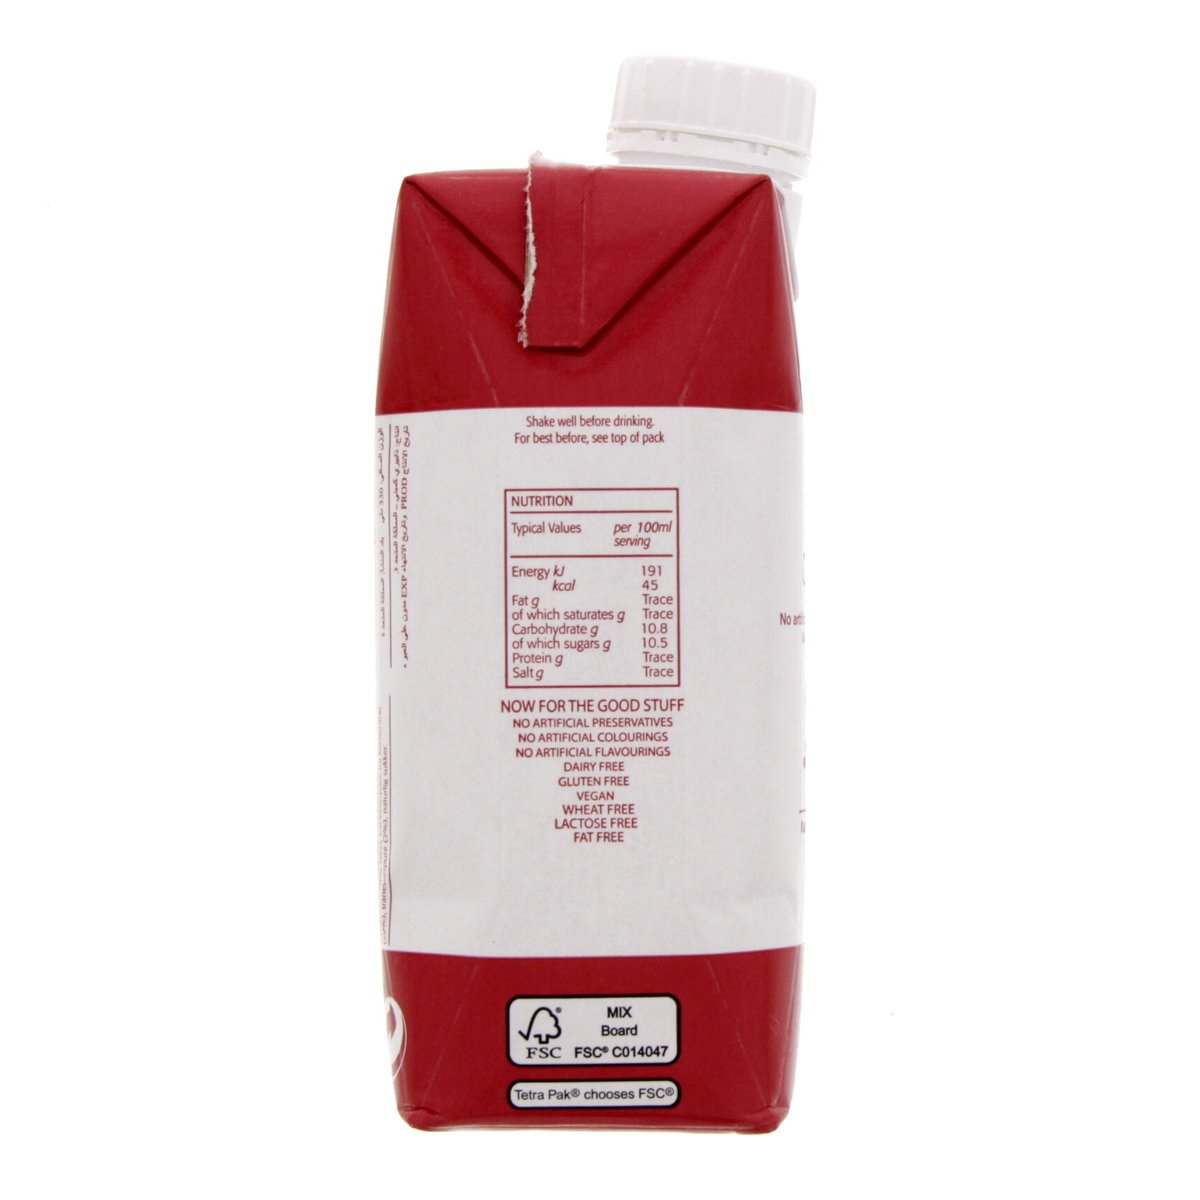 The Berry Company Cranberry Juice Drink 330 ml